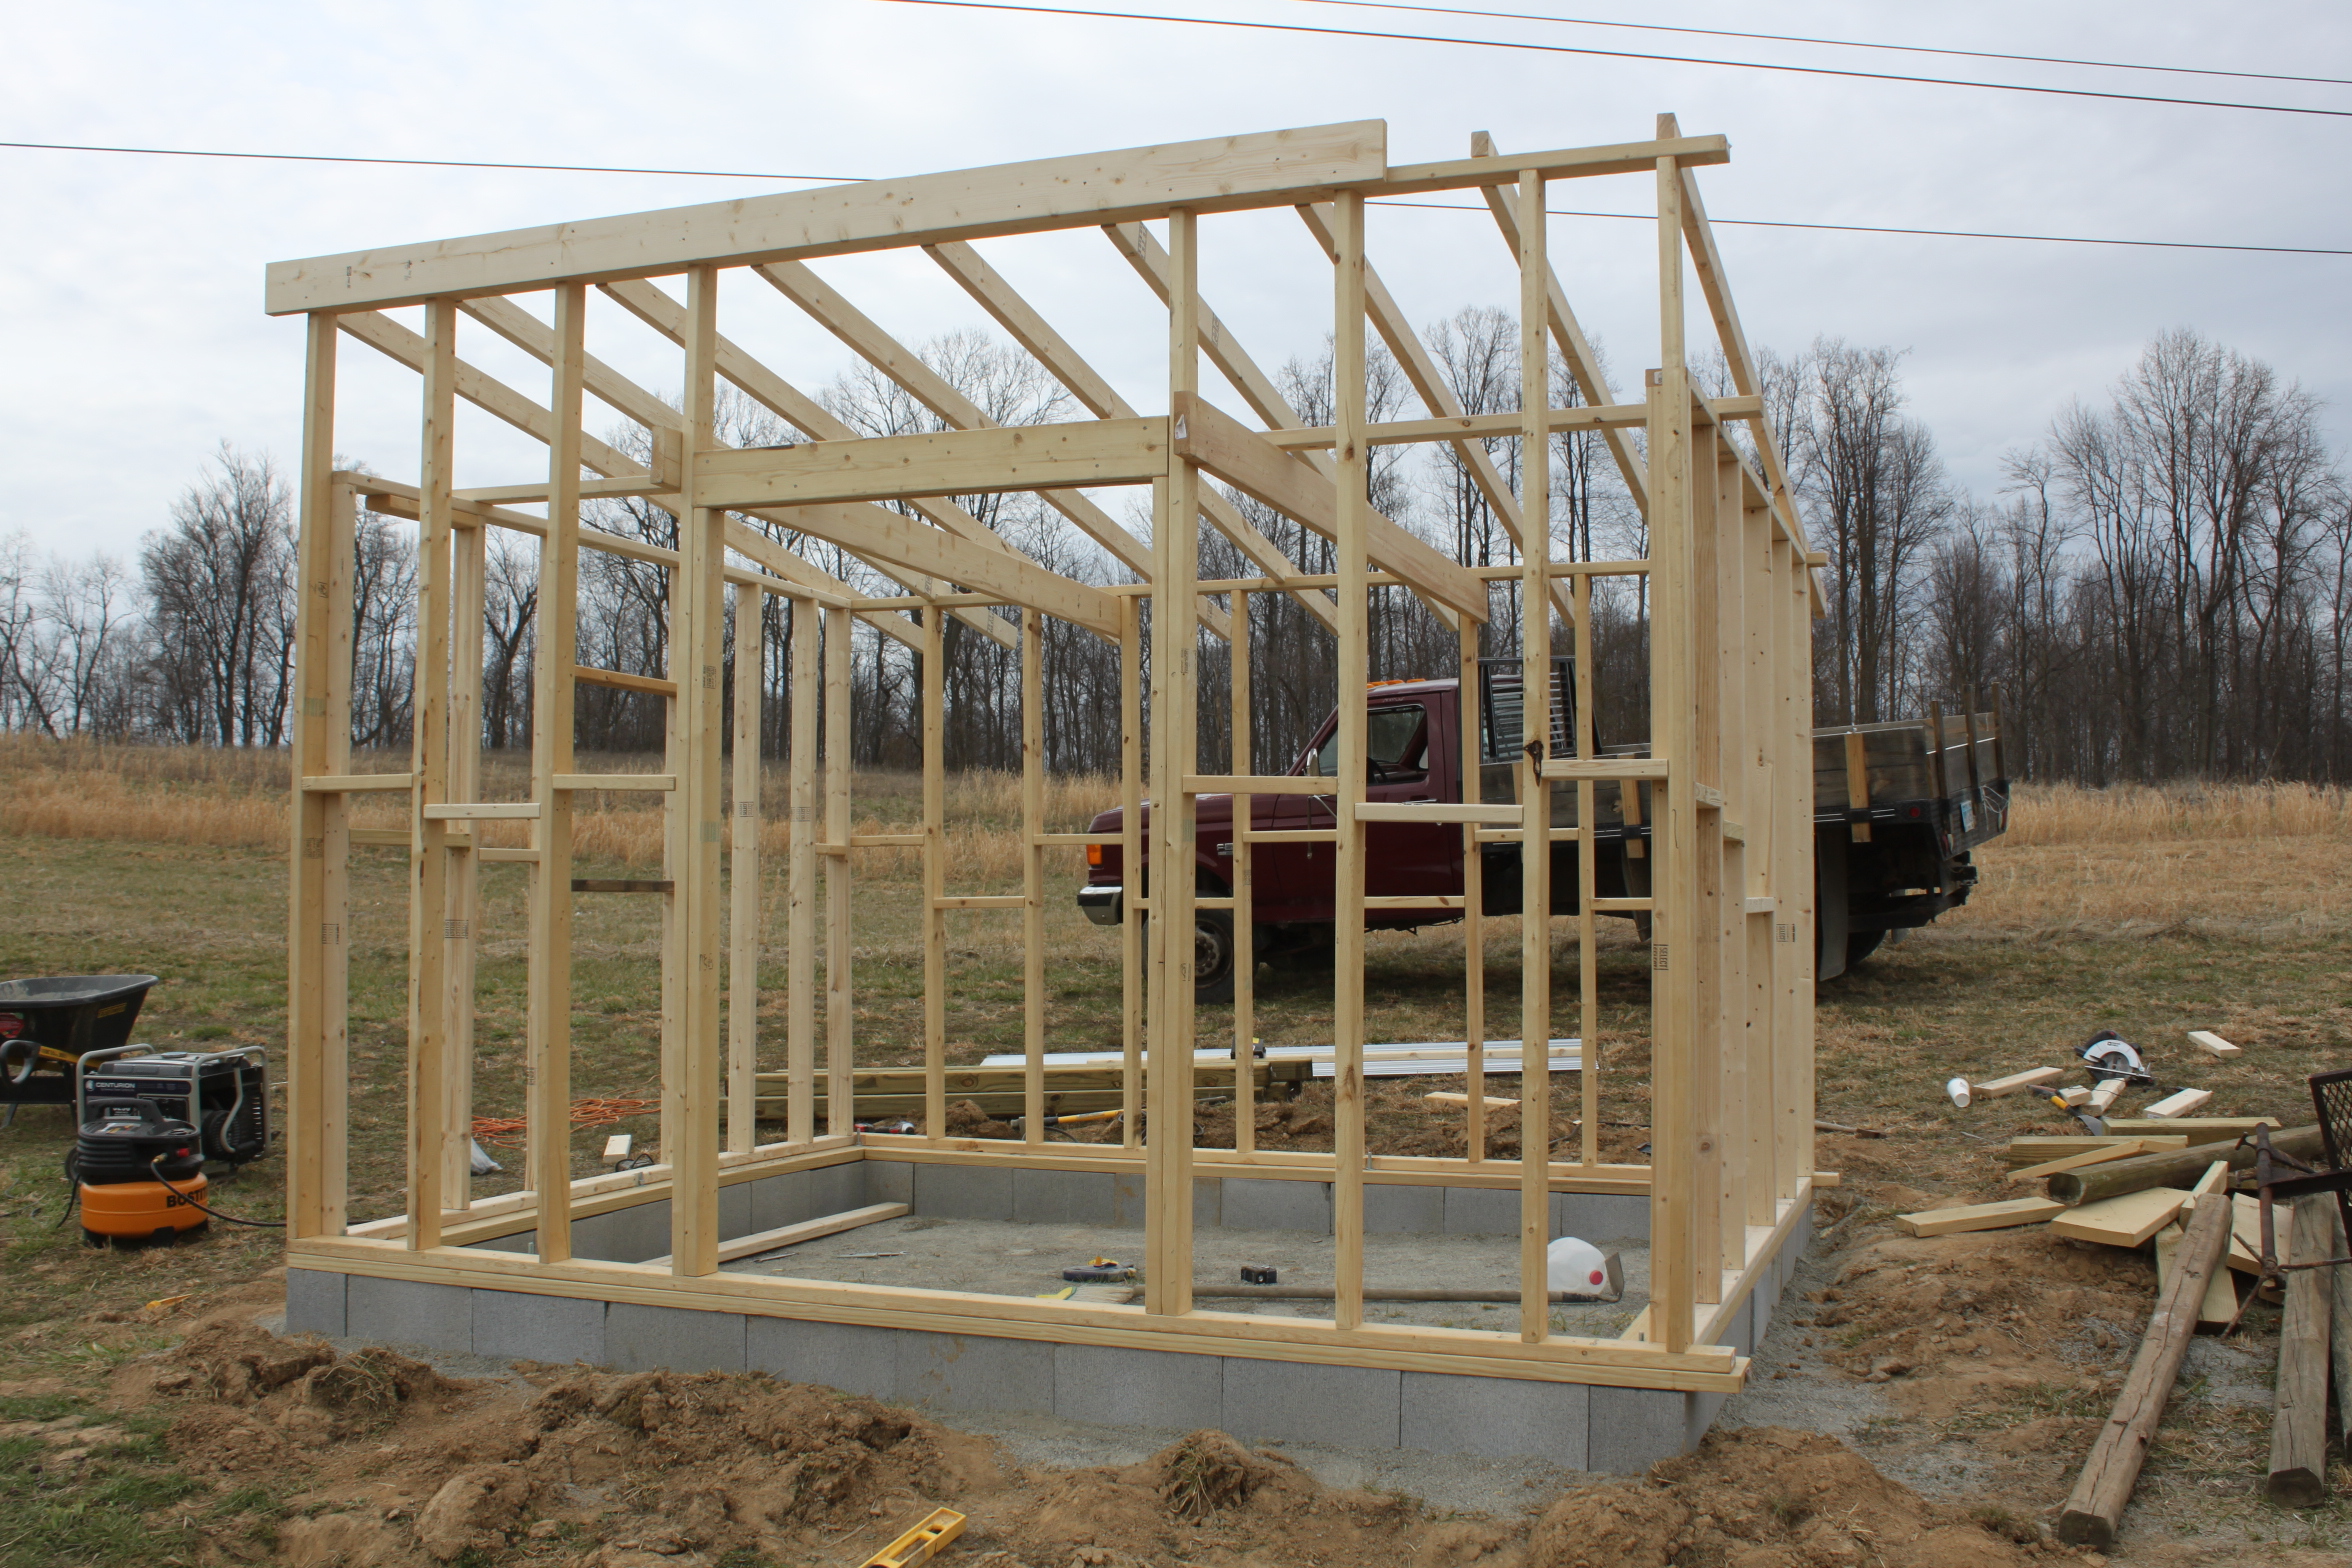 The coop was framed in 2 x4's - on top of a concrete block foundation 